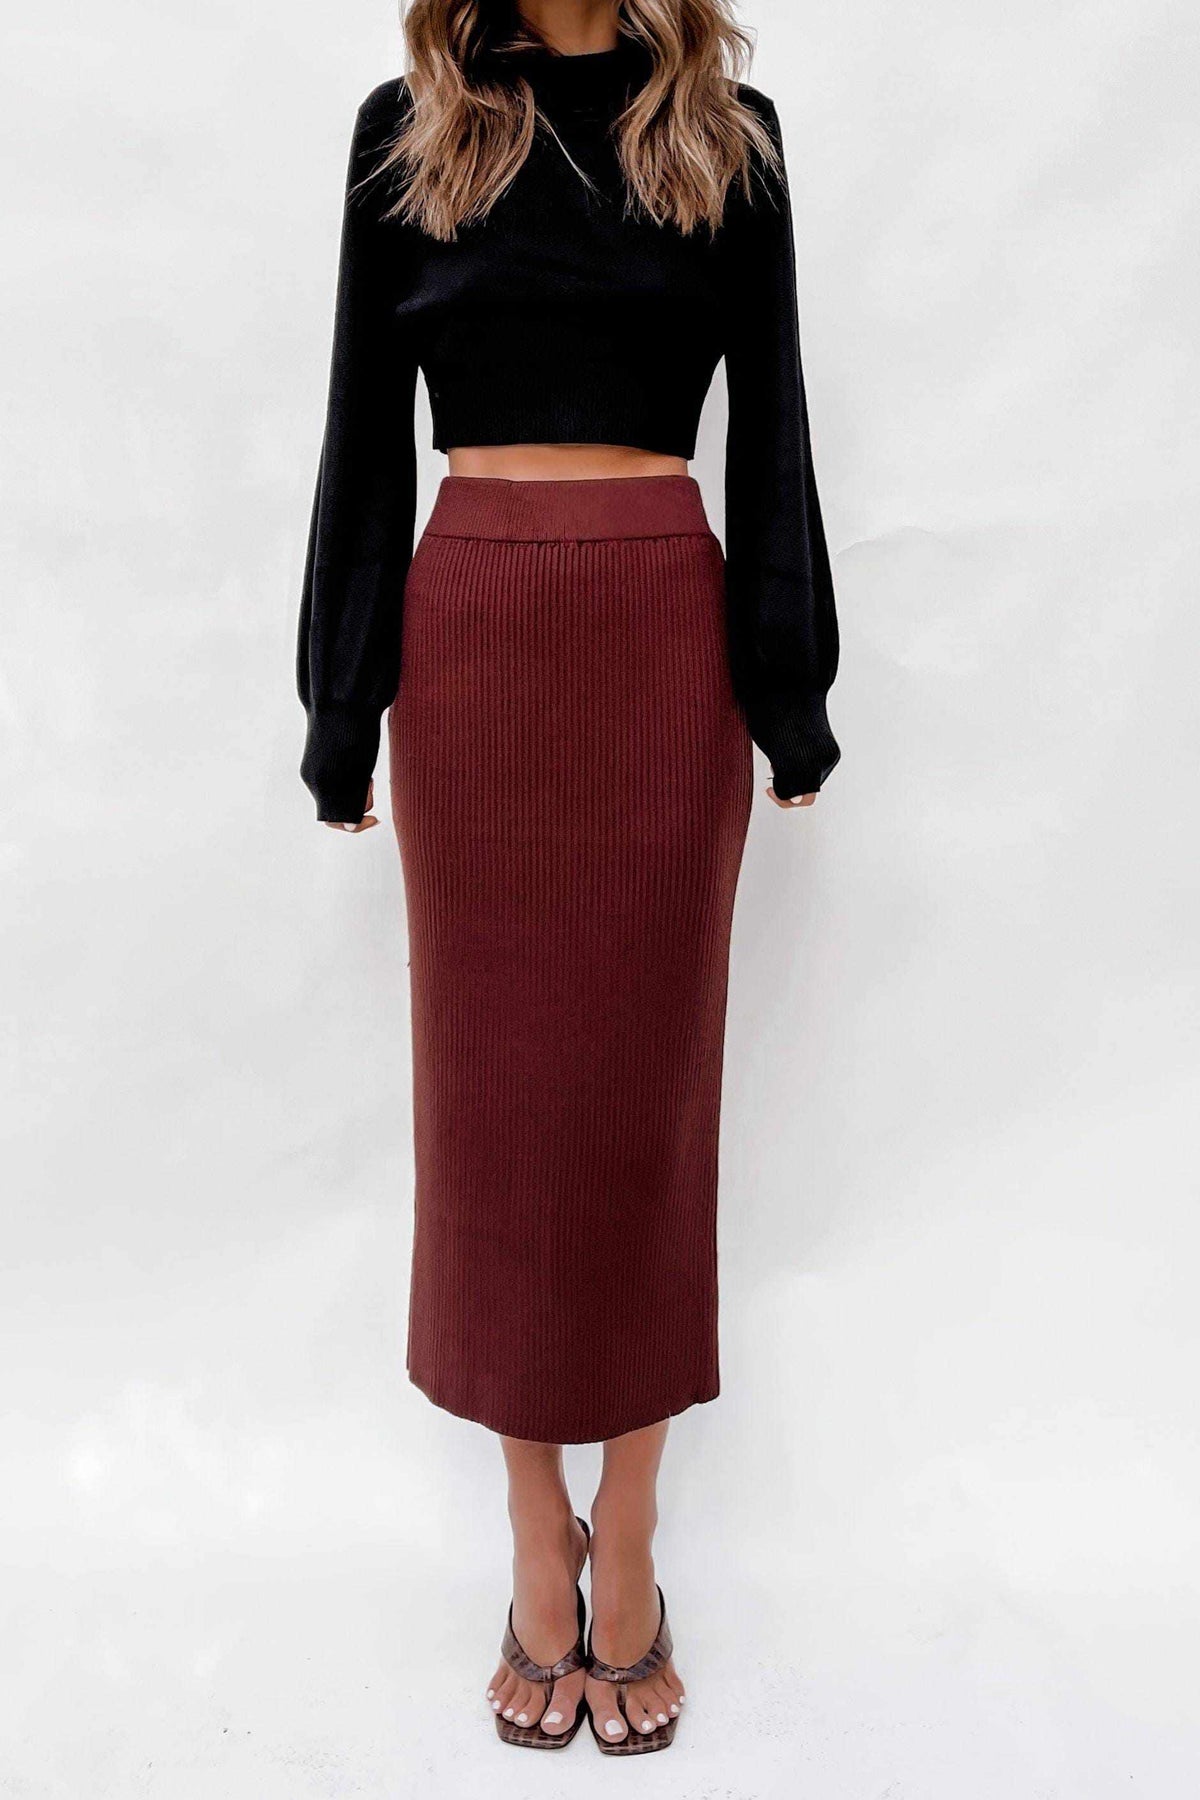 Harlem Top, BASICS, BLACK, CROP TOP, CROP TOPS, Sale, TOPS, Our New Harlem Top Is Now Only $50.00 Exclusive At Mishkah, Our New Harlem Top is now only $50.00-We Have The Latest Women&#39;s Tops @ Mishkah Online Fashion Boutique-MISHKAH